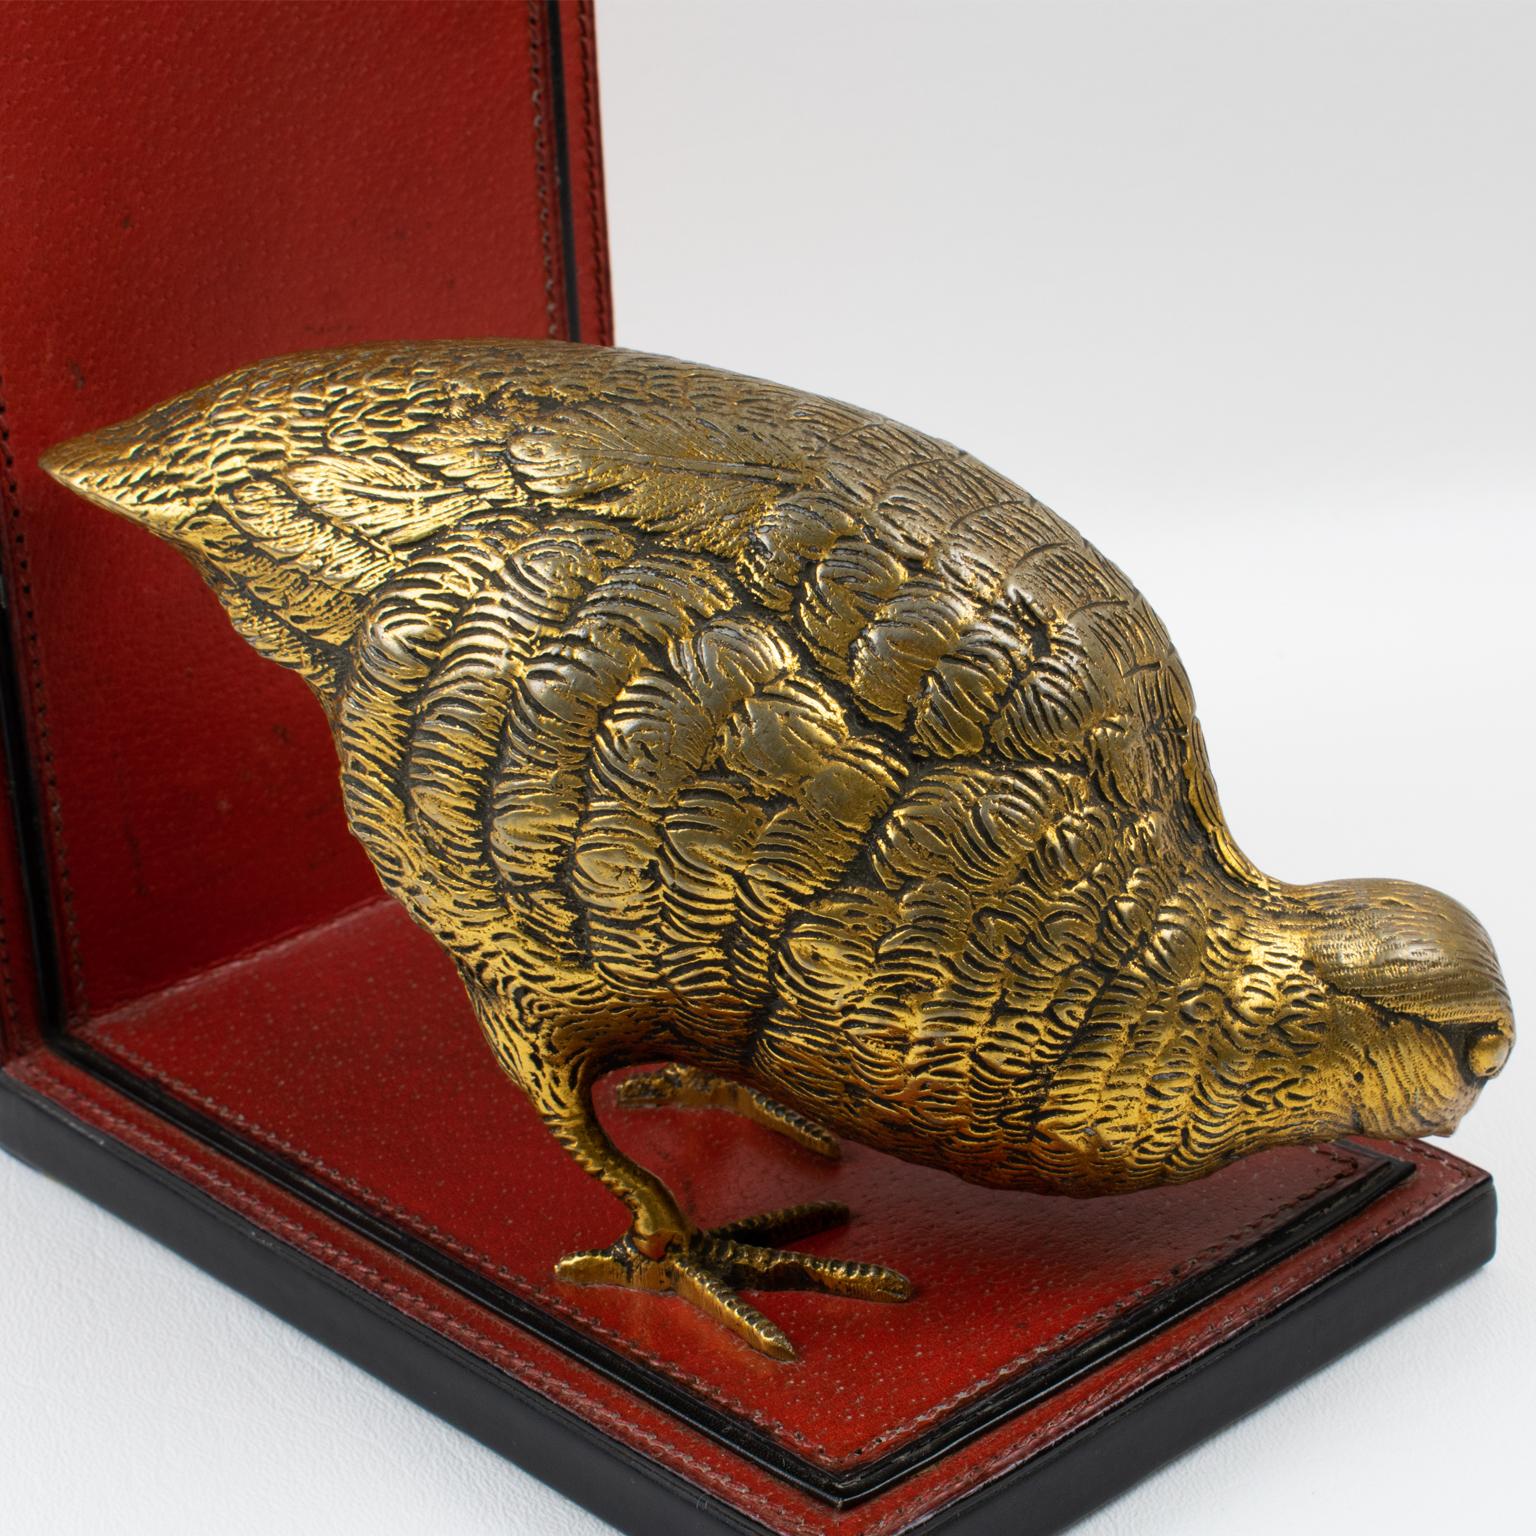 Gucci Italy Hand-Stitched Red Leather Bookends with Gilt Metal Partridges, 1970s For Sale 3